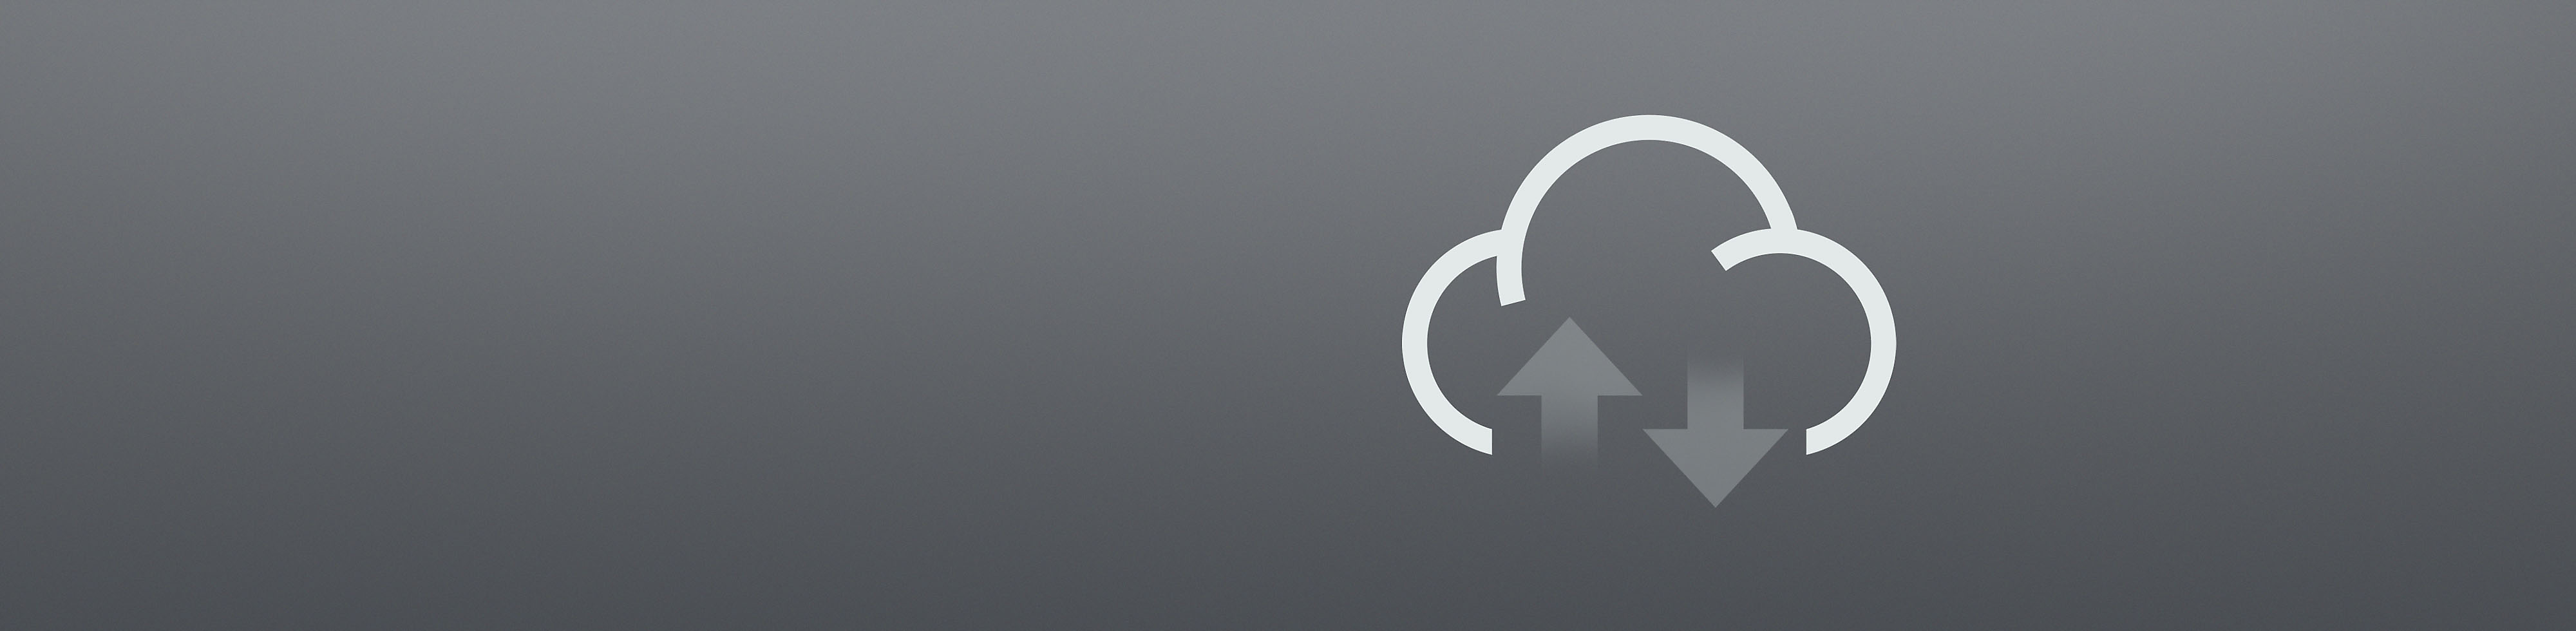 Grey icon of upload/download from the cloud